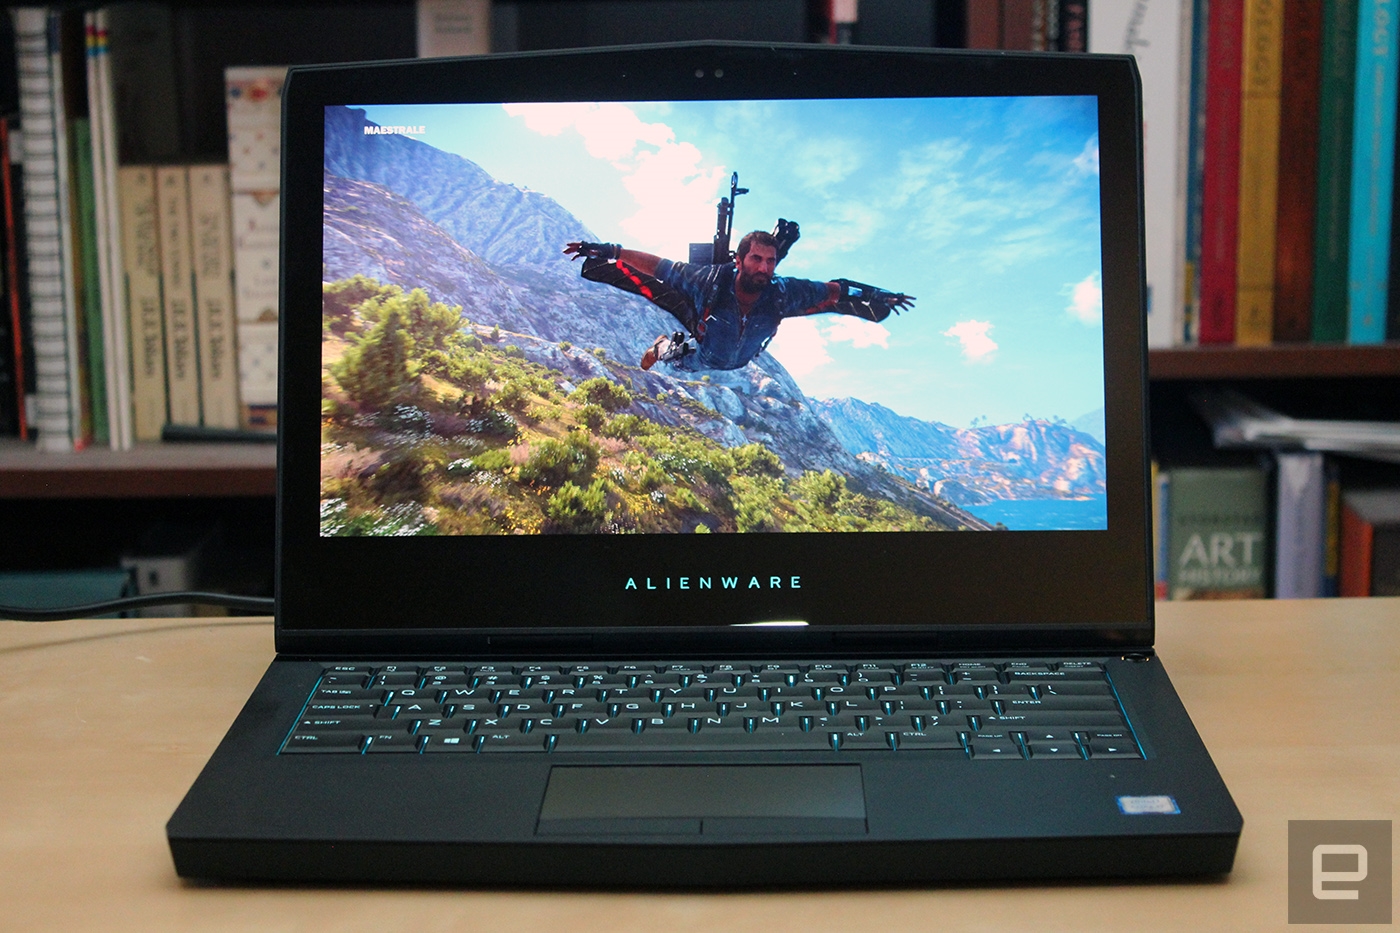 The Alienware 13 gets better with VR and impressive battery life | DeviceDaily.com